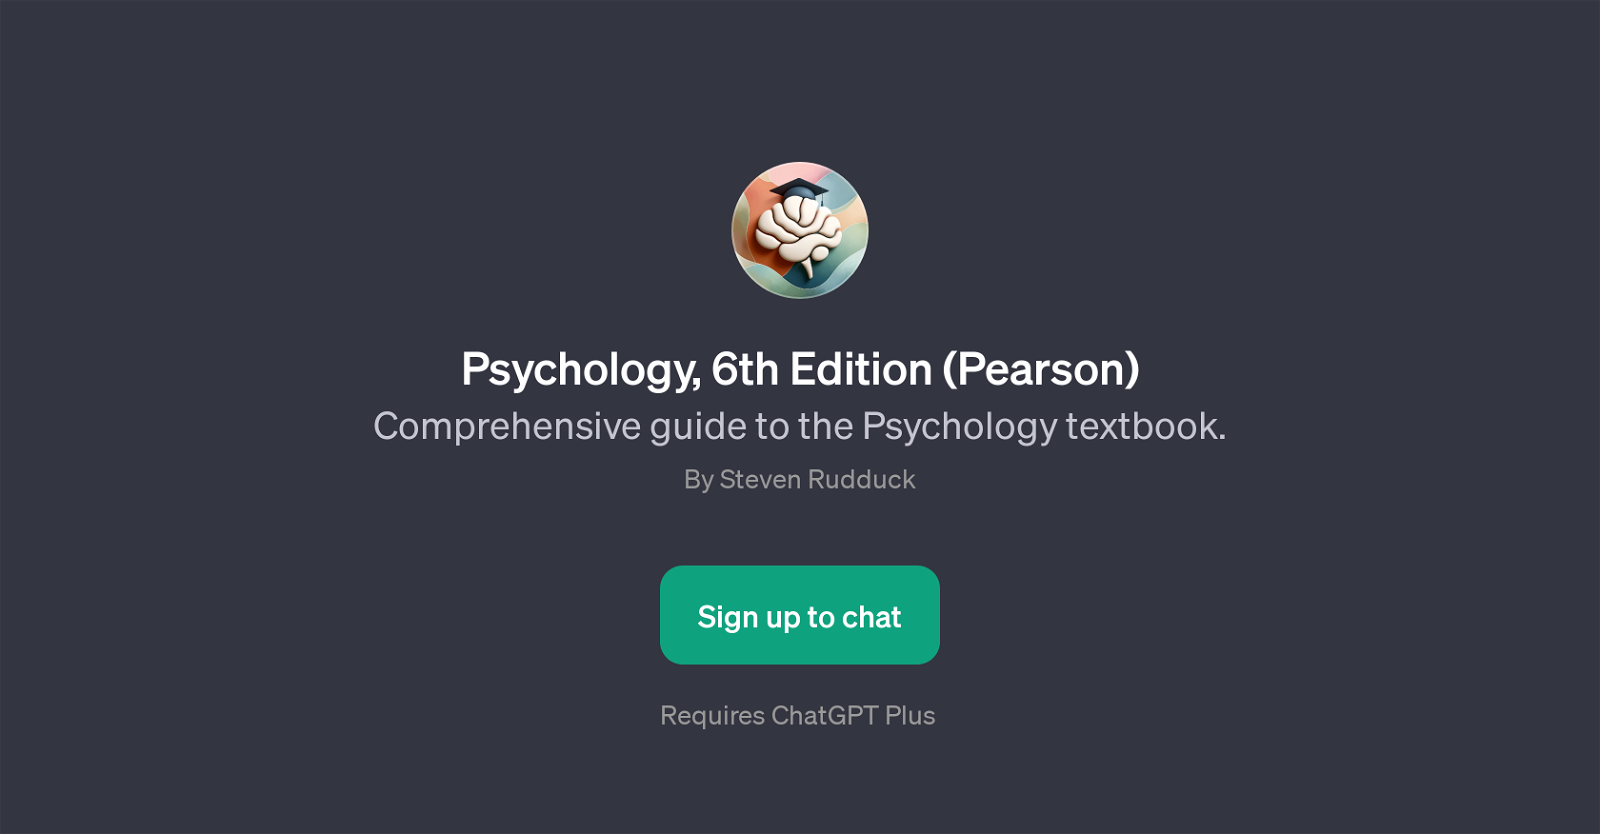 Psychology, 6th Edition (Pearson) website